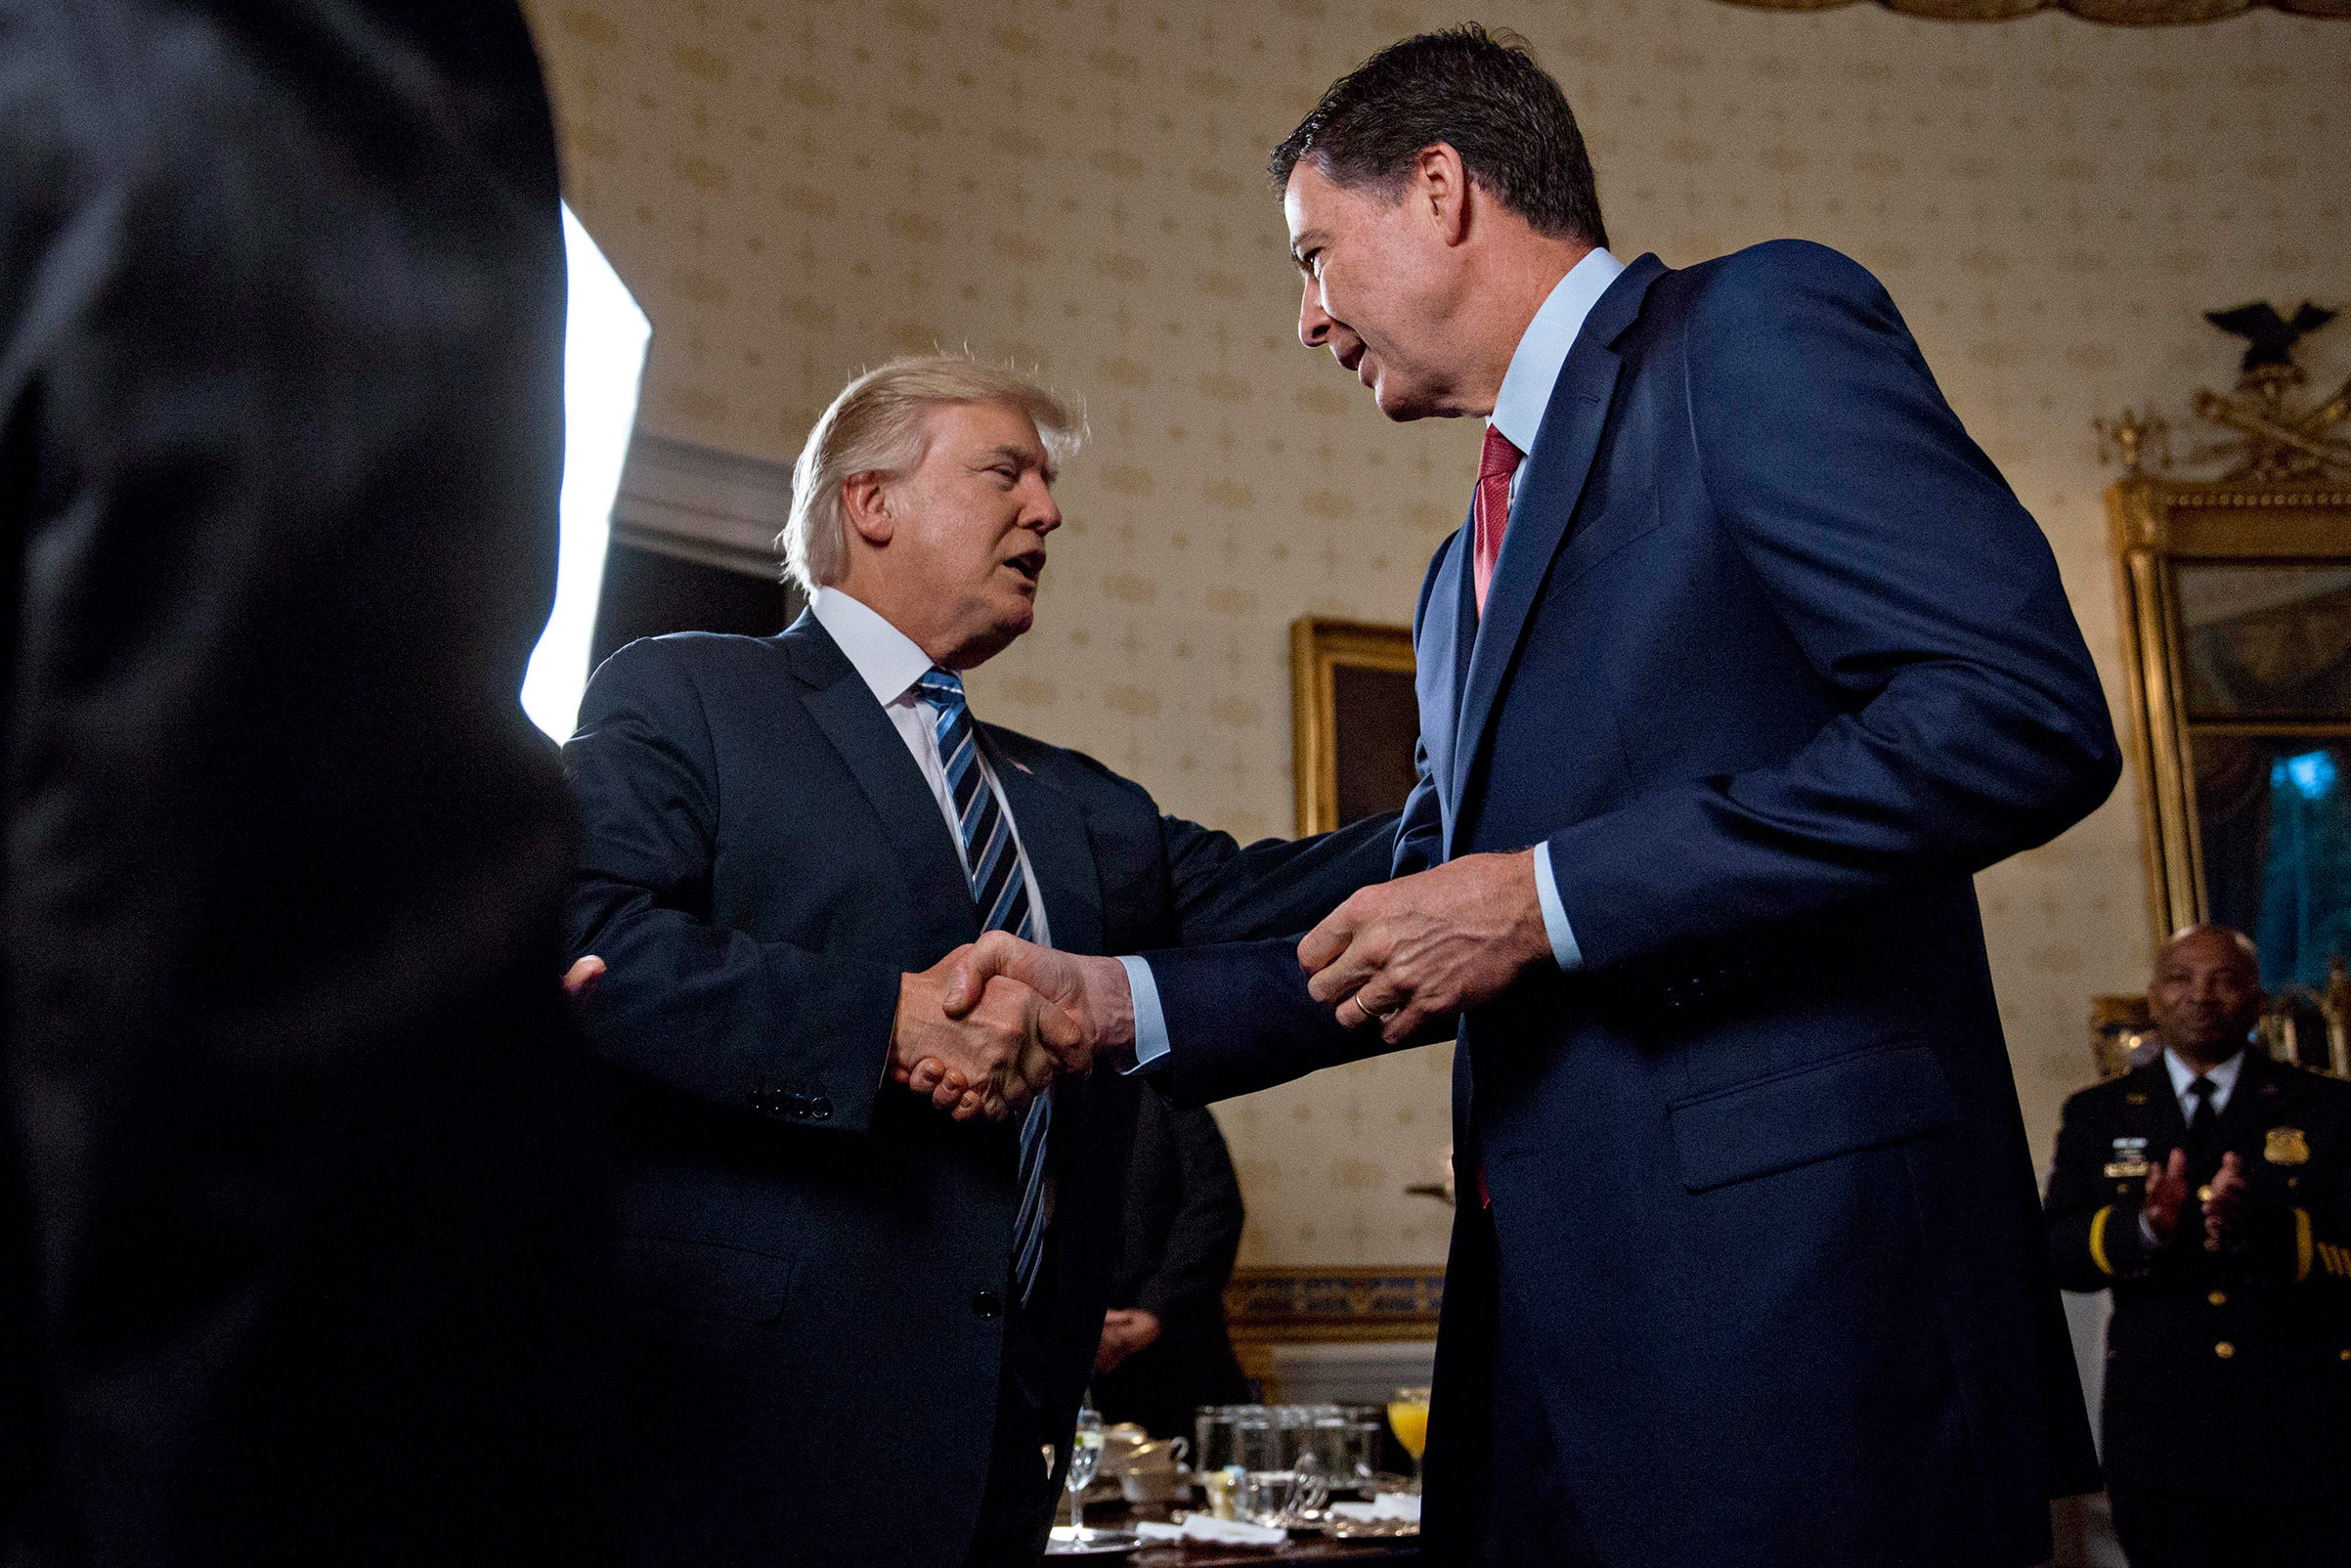 President Trump shakes hands with former FBI Director James Comey at a White House reception (Andrew Harrer—Avalon/Zuma Press)